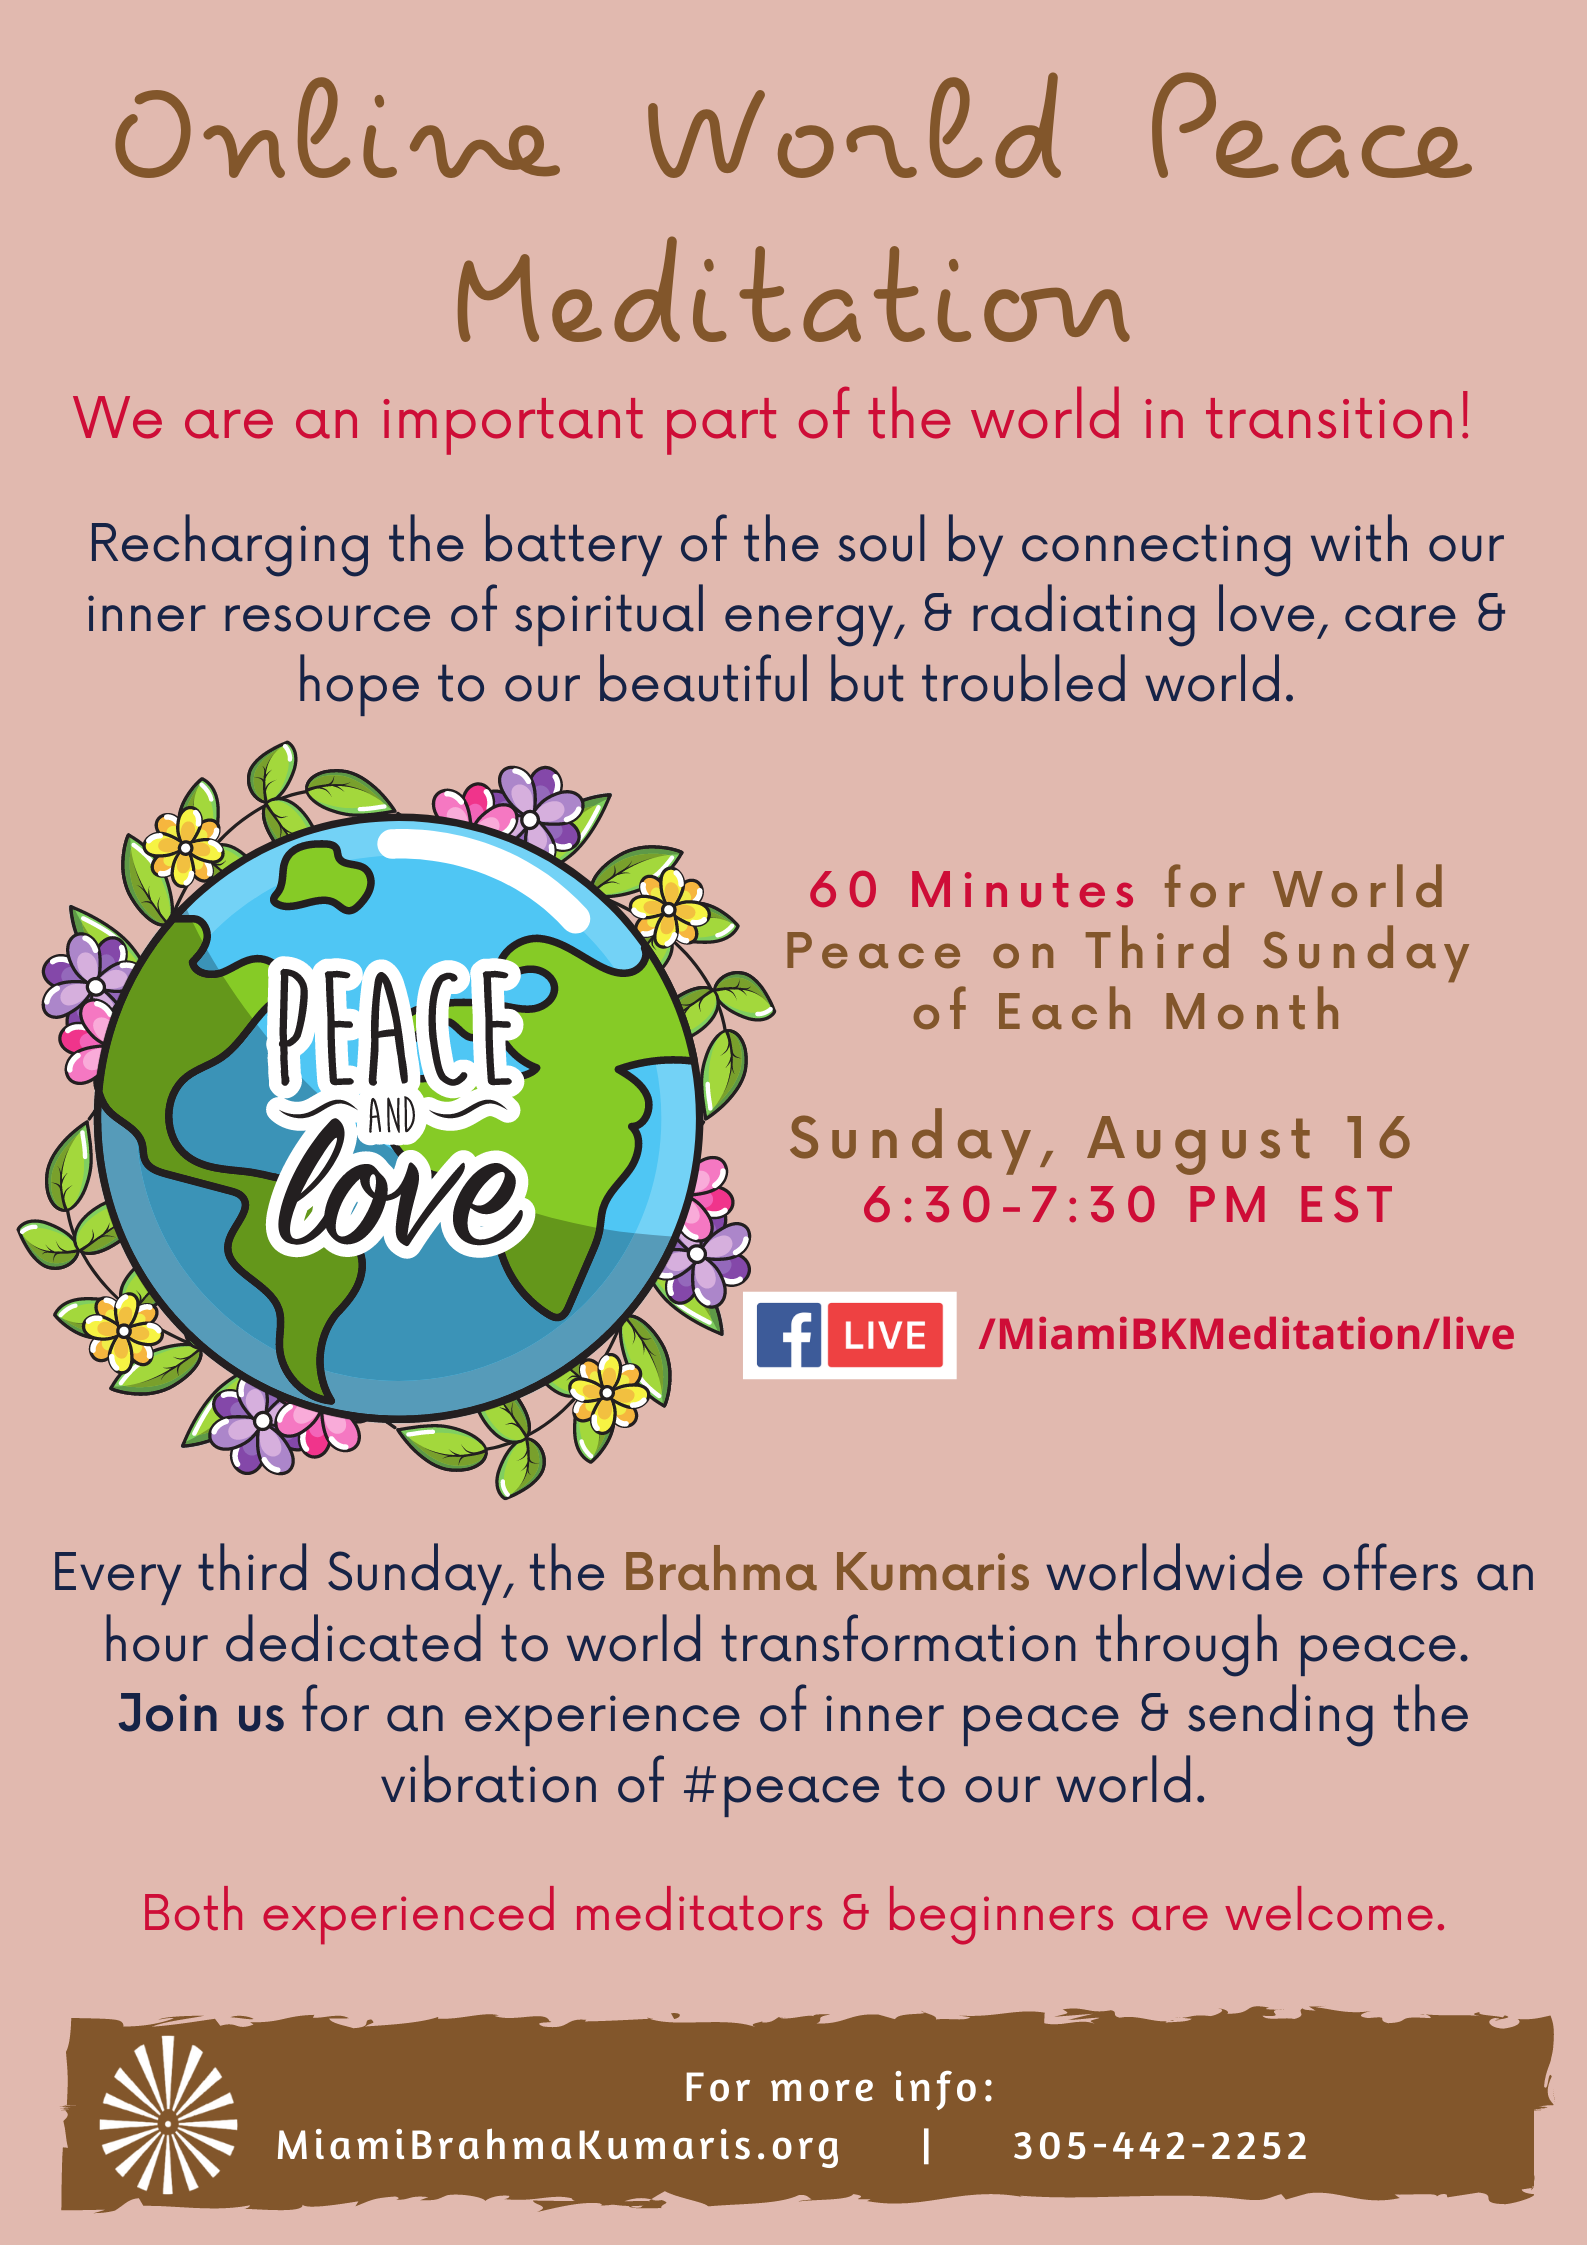 Online World Peace Meditation: Transformation through vibrations of #peace